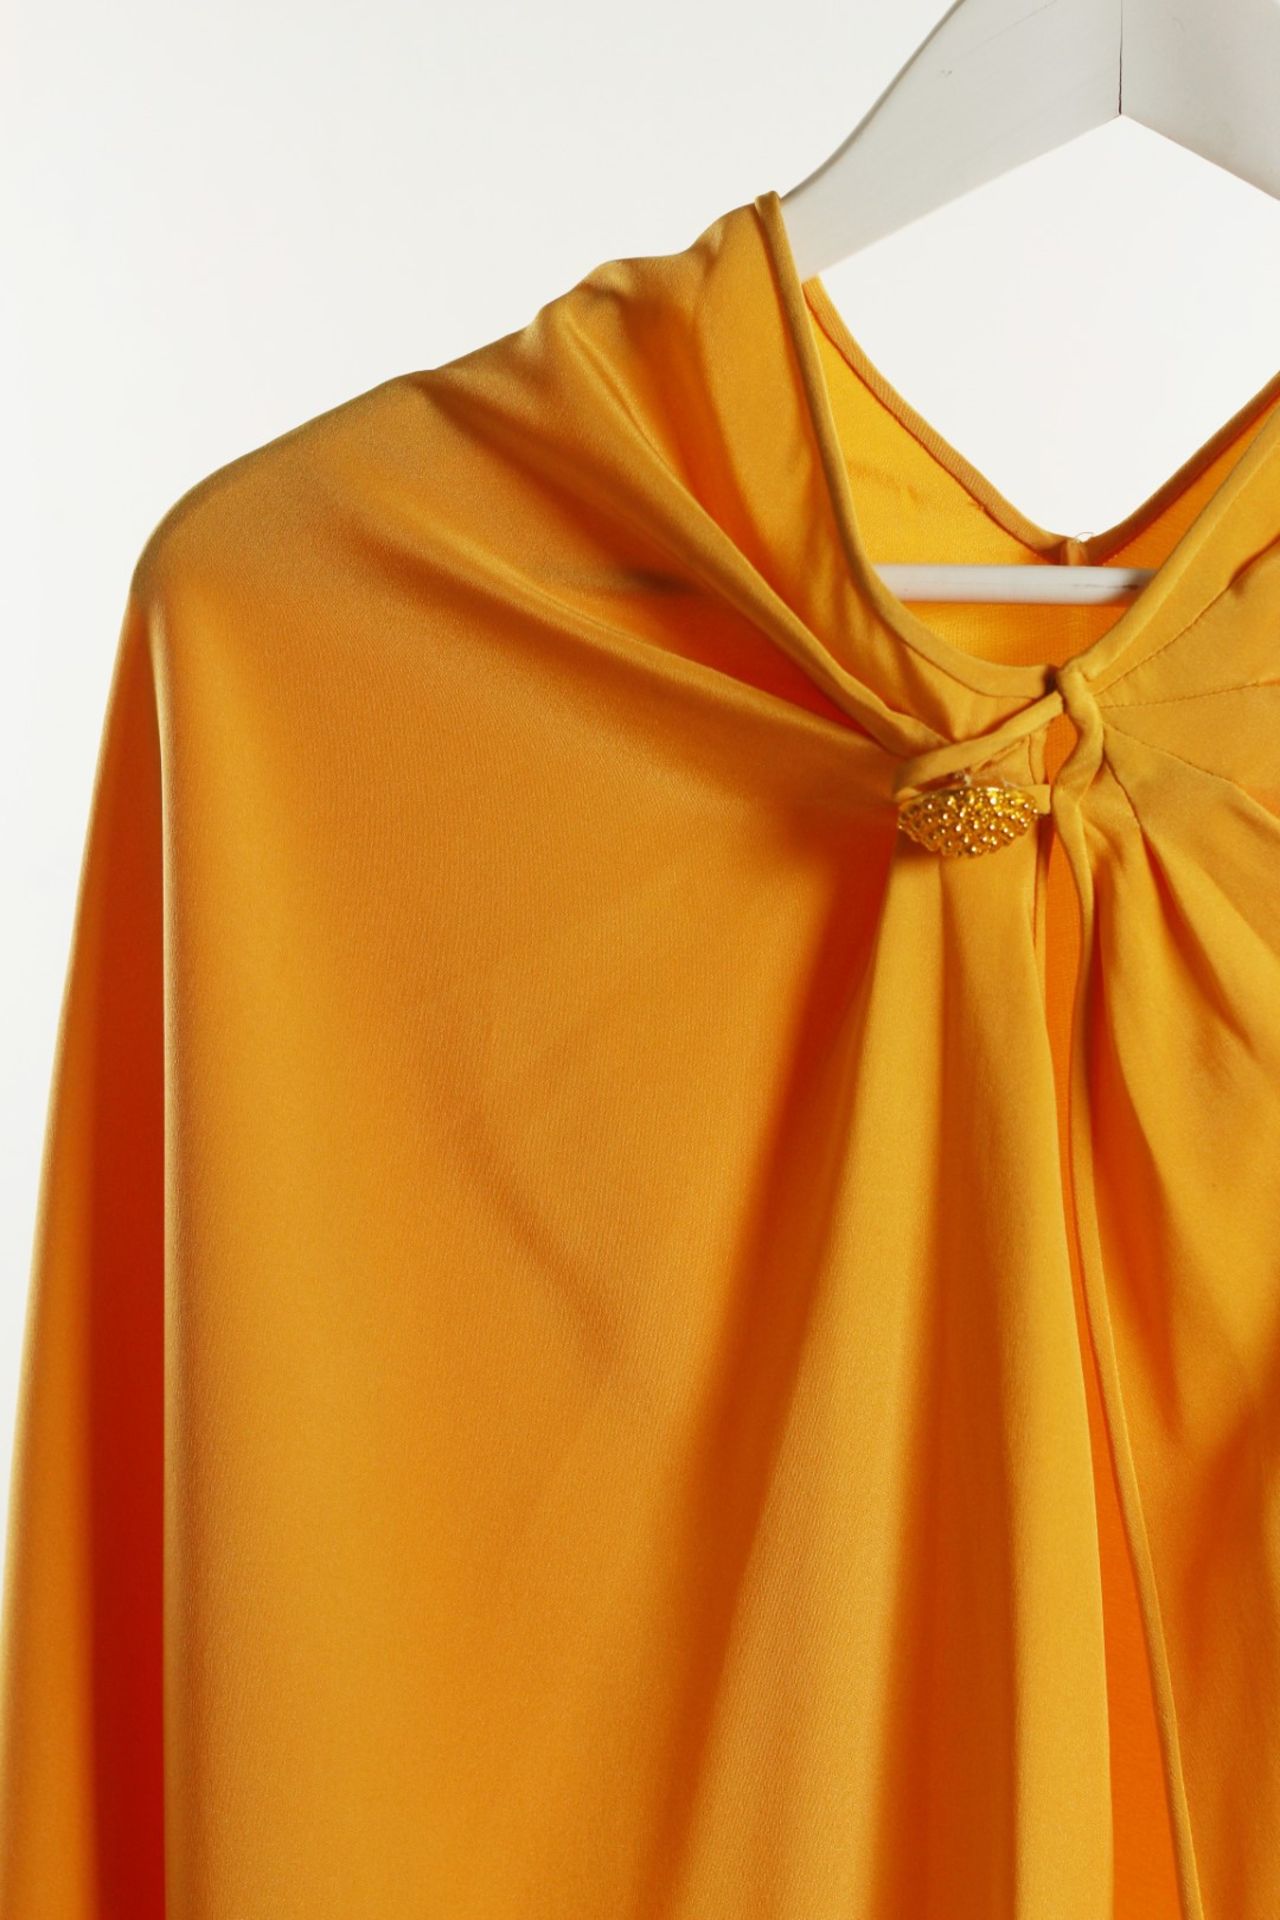 1 x Boutique Le Duc Apricot Wrap/Shawl - From a High End Clothing Boutique In The - Image 2 of 8